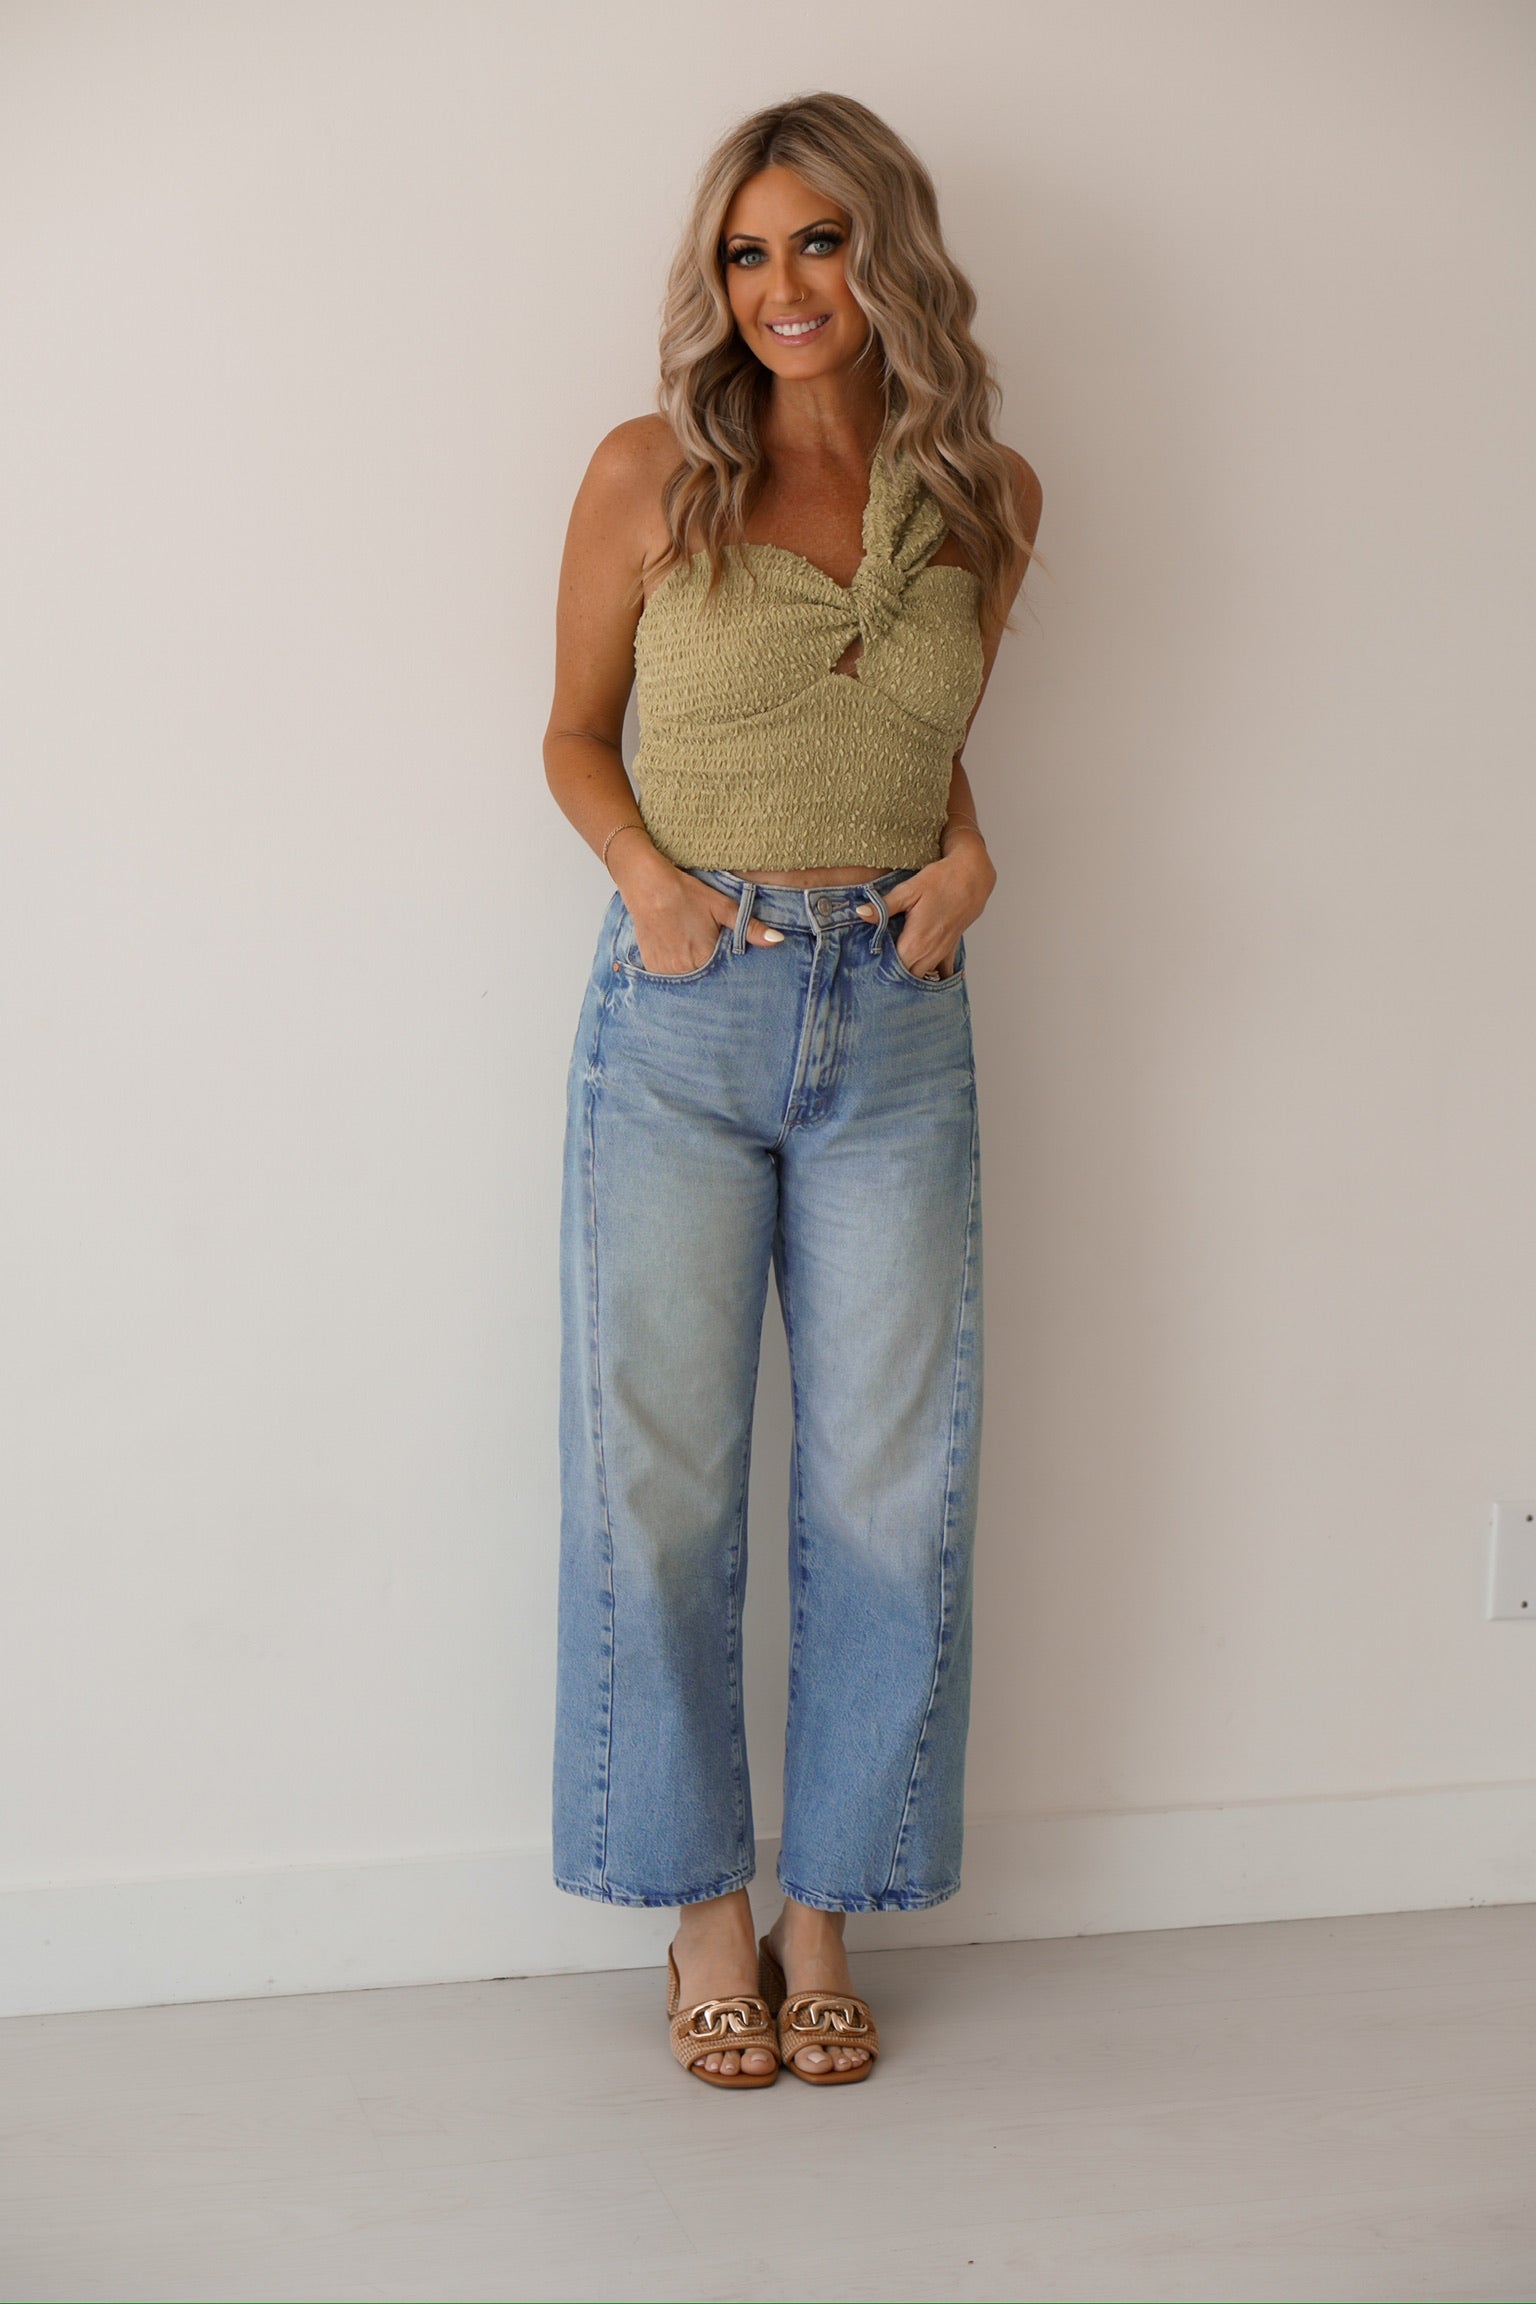 blonde headed girl standing against white wall wearing a lime green one shoulder top, high waisted jeans, and some tan sandals